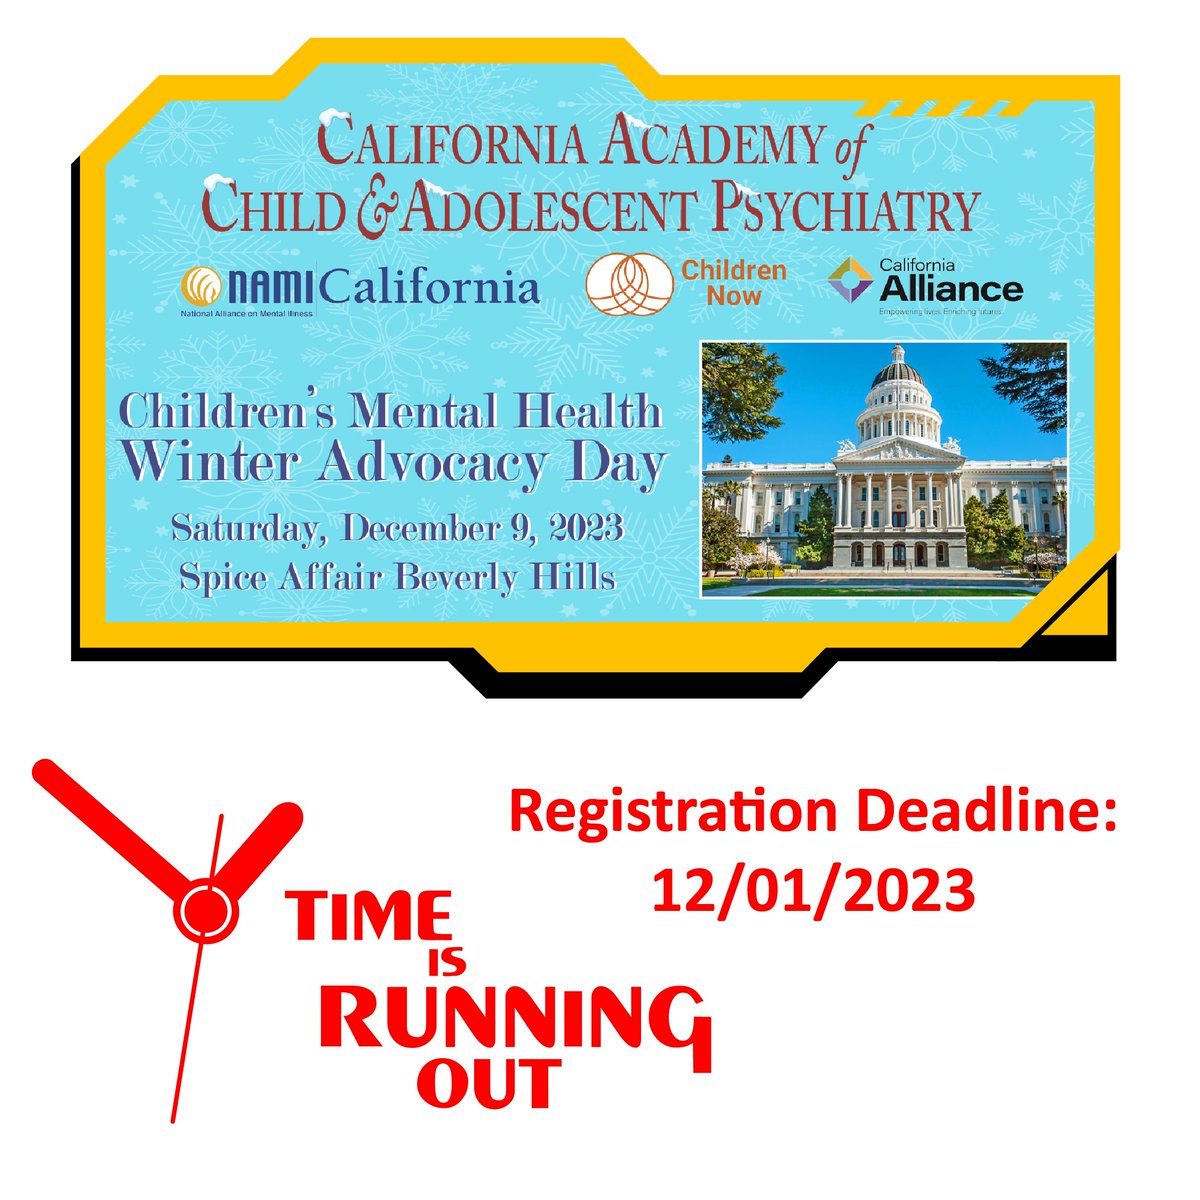 ⌛ 24 hours left to register for CALACAP at the Annual Winter Advocacy Conference! Learn about CA legislative issues, build connections, and shape the 2023-2024 agenda. Reserve your spot today at bit.ly/WinterAdvcy23! #ChildMentalHealth #CALACAP2023 #AdvocacyConference